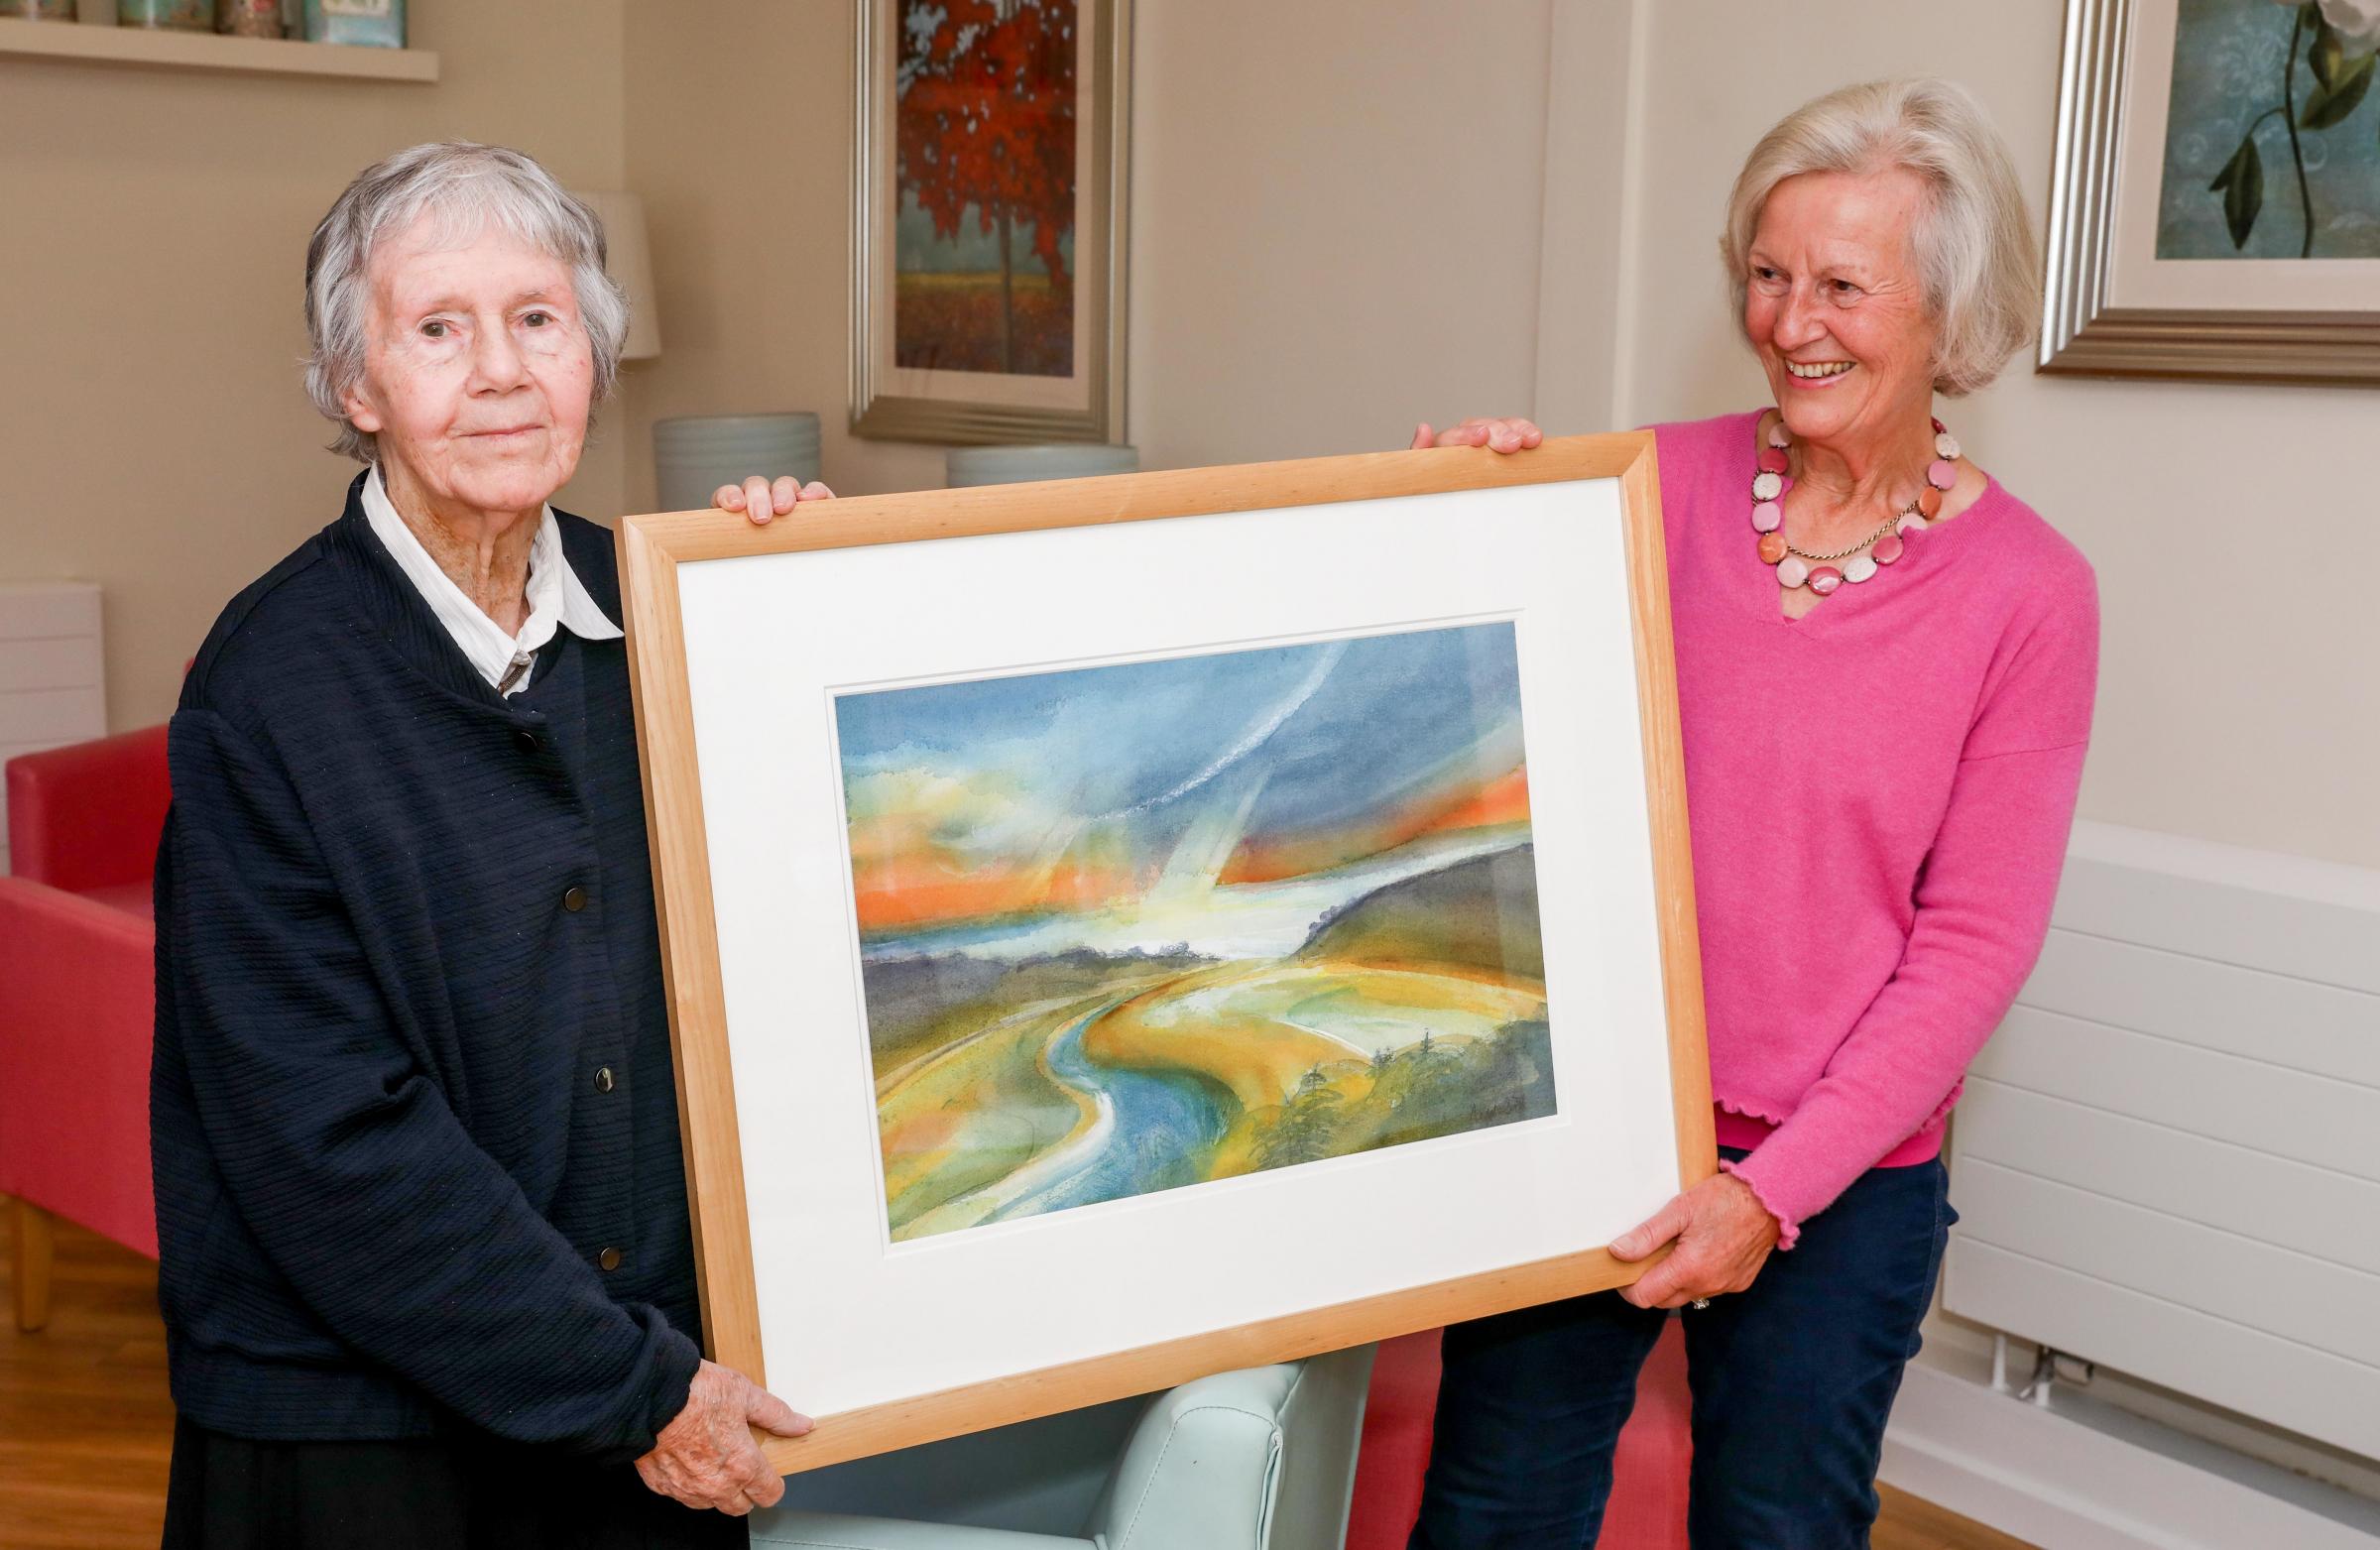 Pendine Park, Hillbury Care Home, Wrexham Artist Angela Scott is organising an art exhibition in aid of the Alzheimers Society and Hillbury Care Home at her studio at Sadylt Home Farm. Angelas sister Jenny Holbrook 90 is a resident at the home and